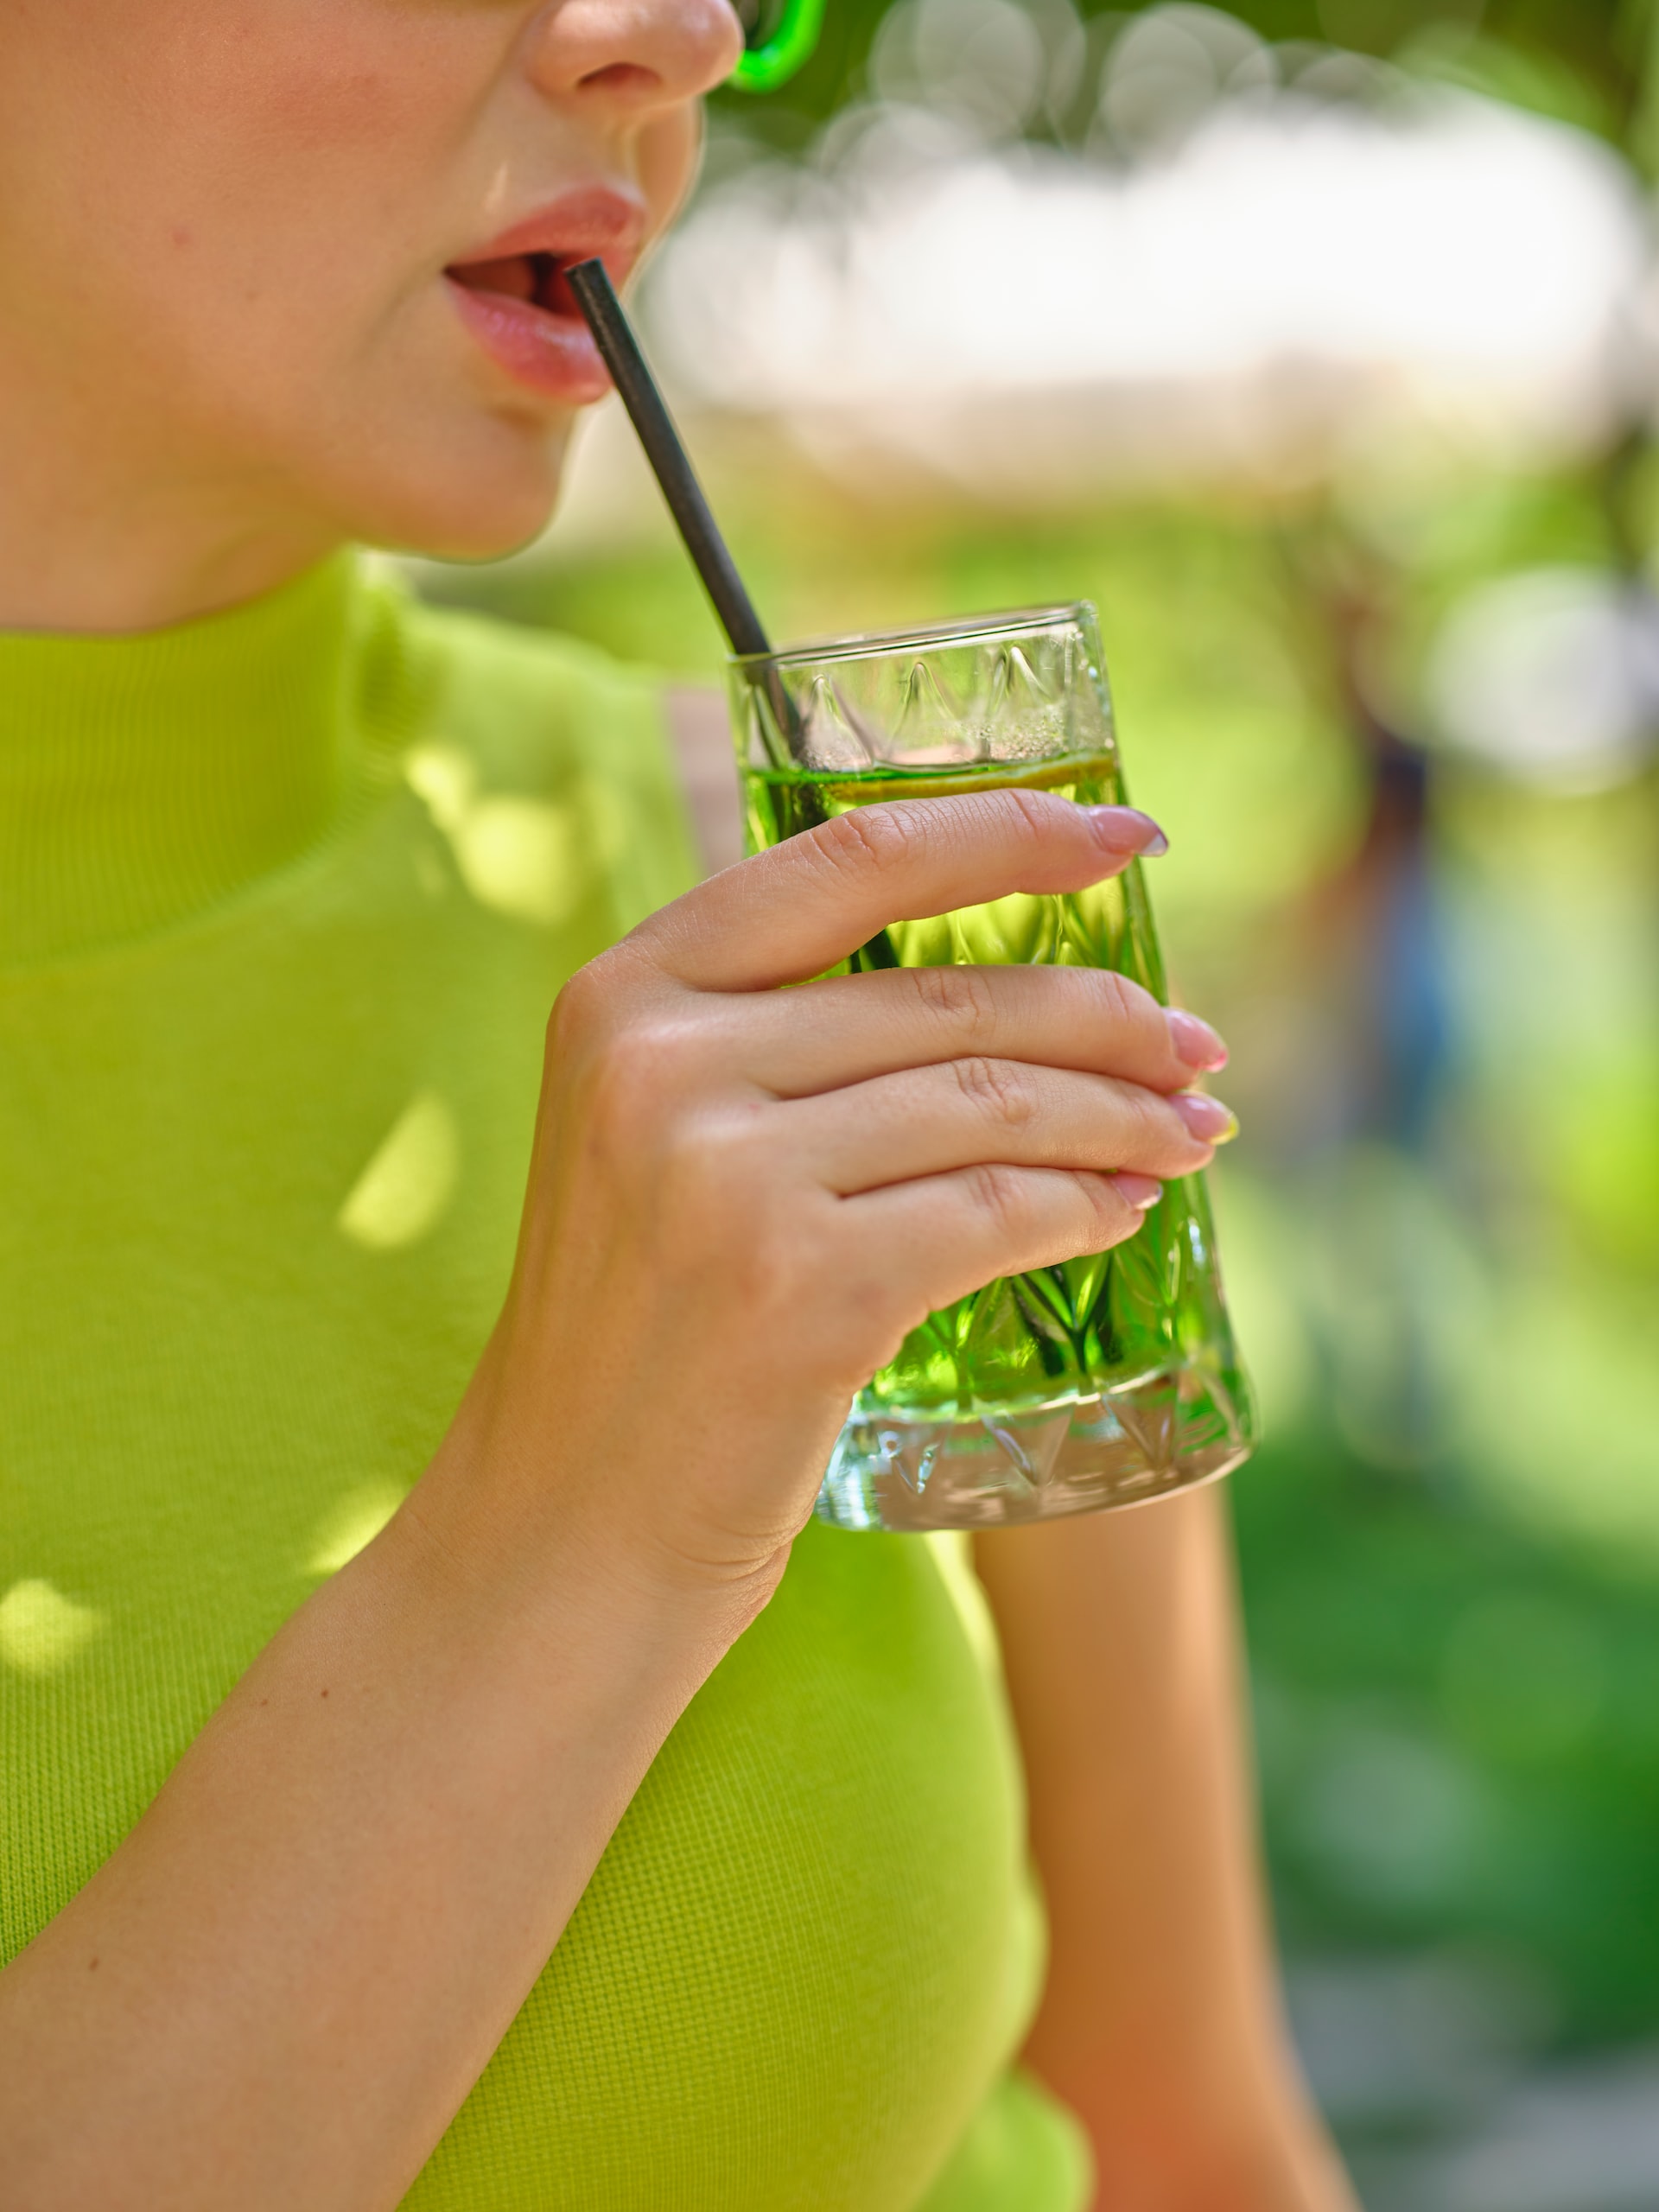 A woman wearing green drinking a green cocktail outside.